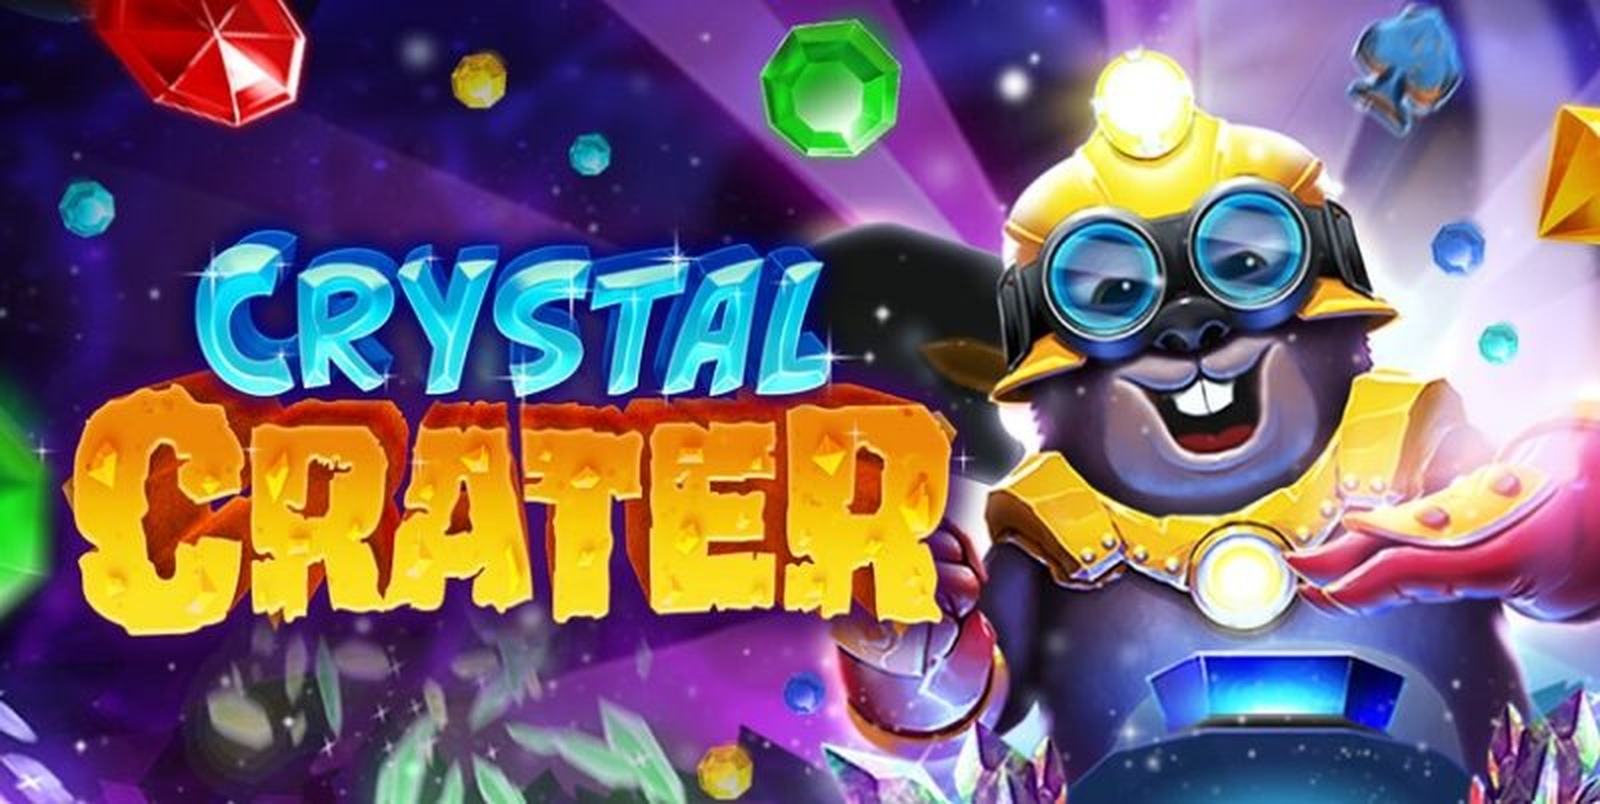 Crystal Crater demo